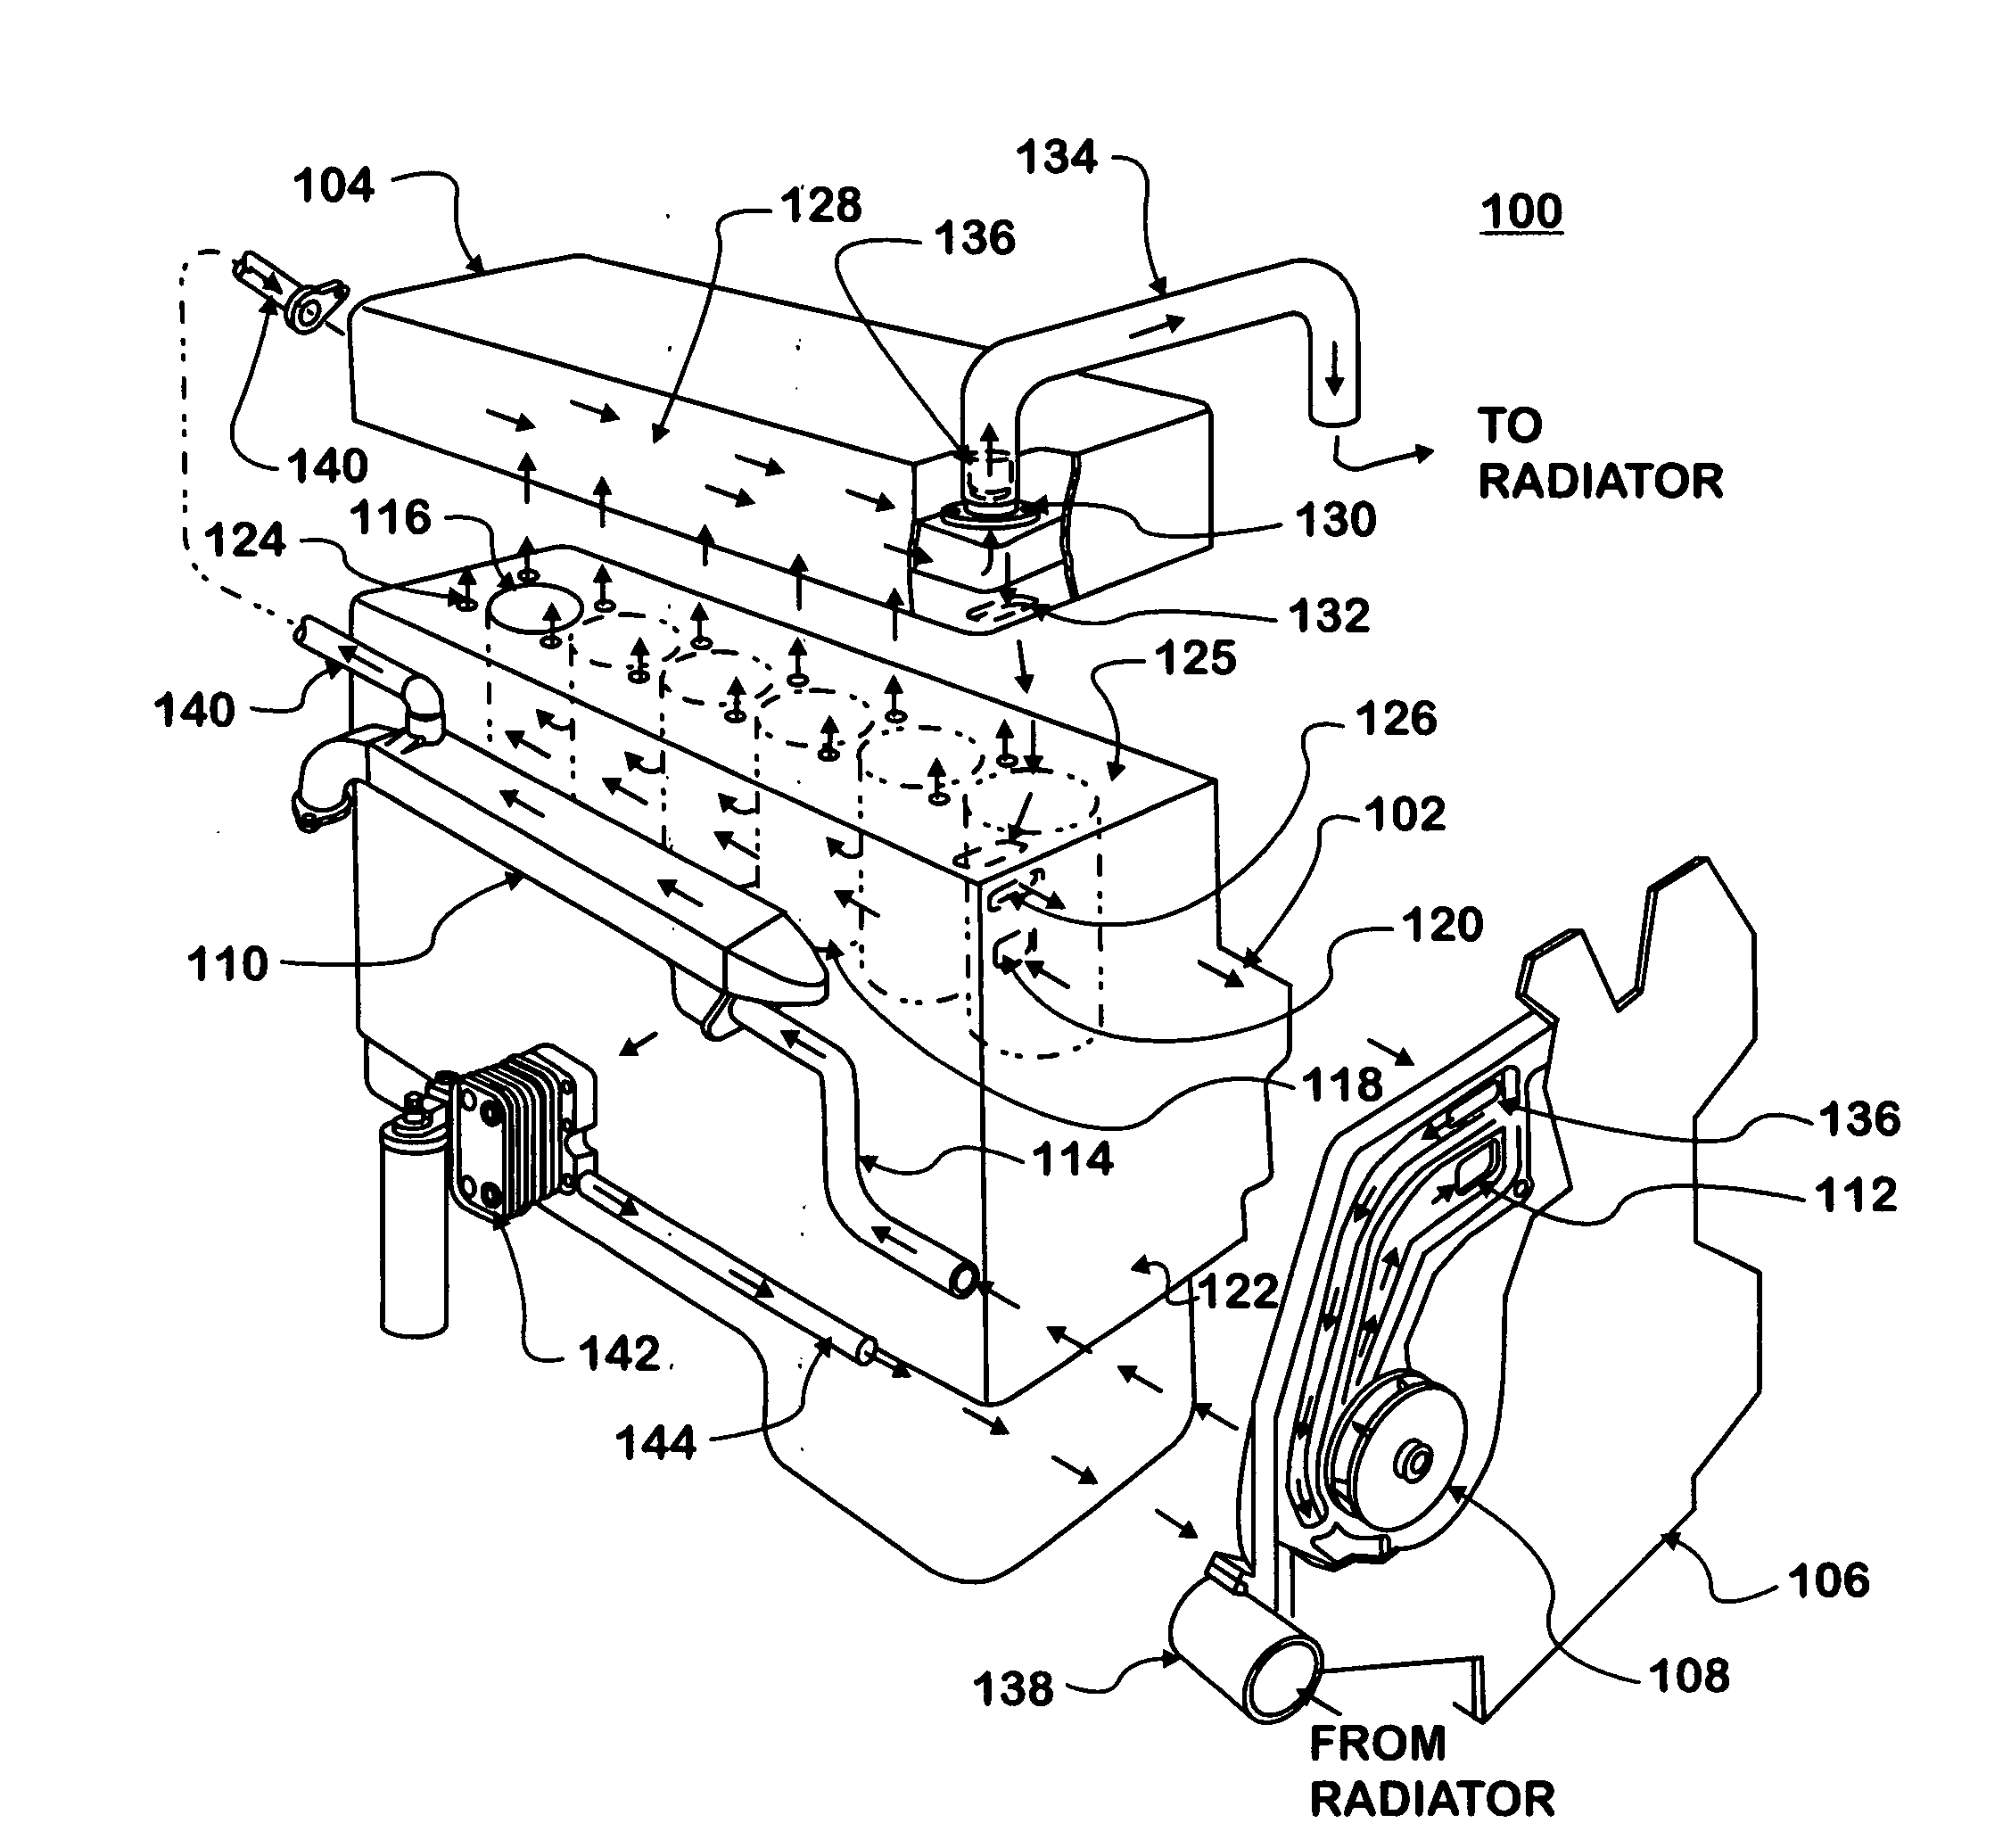 Cooling system for an internal combustion engine with exhaust gas recirculation (EGR)